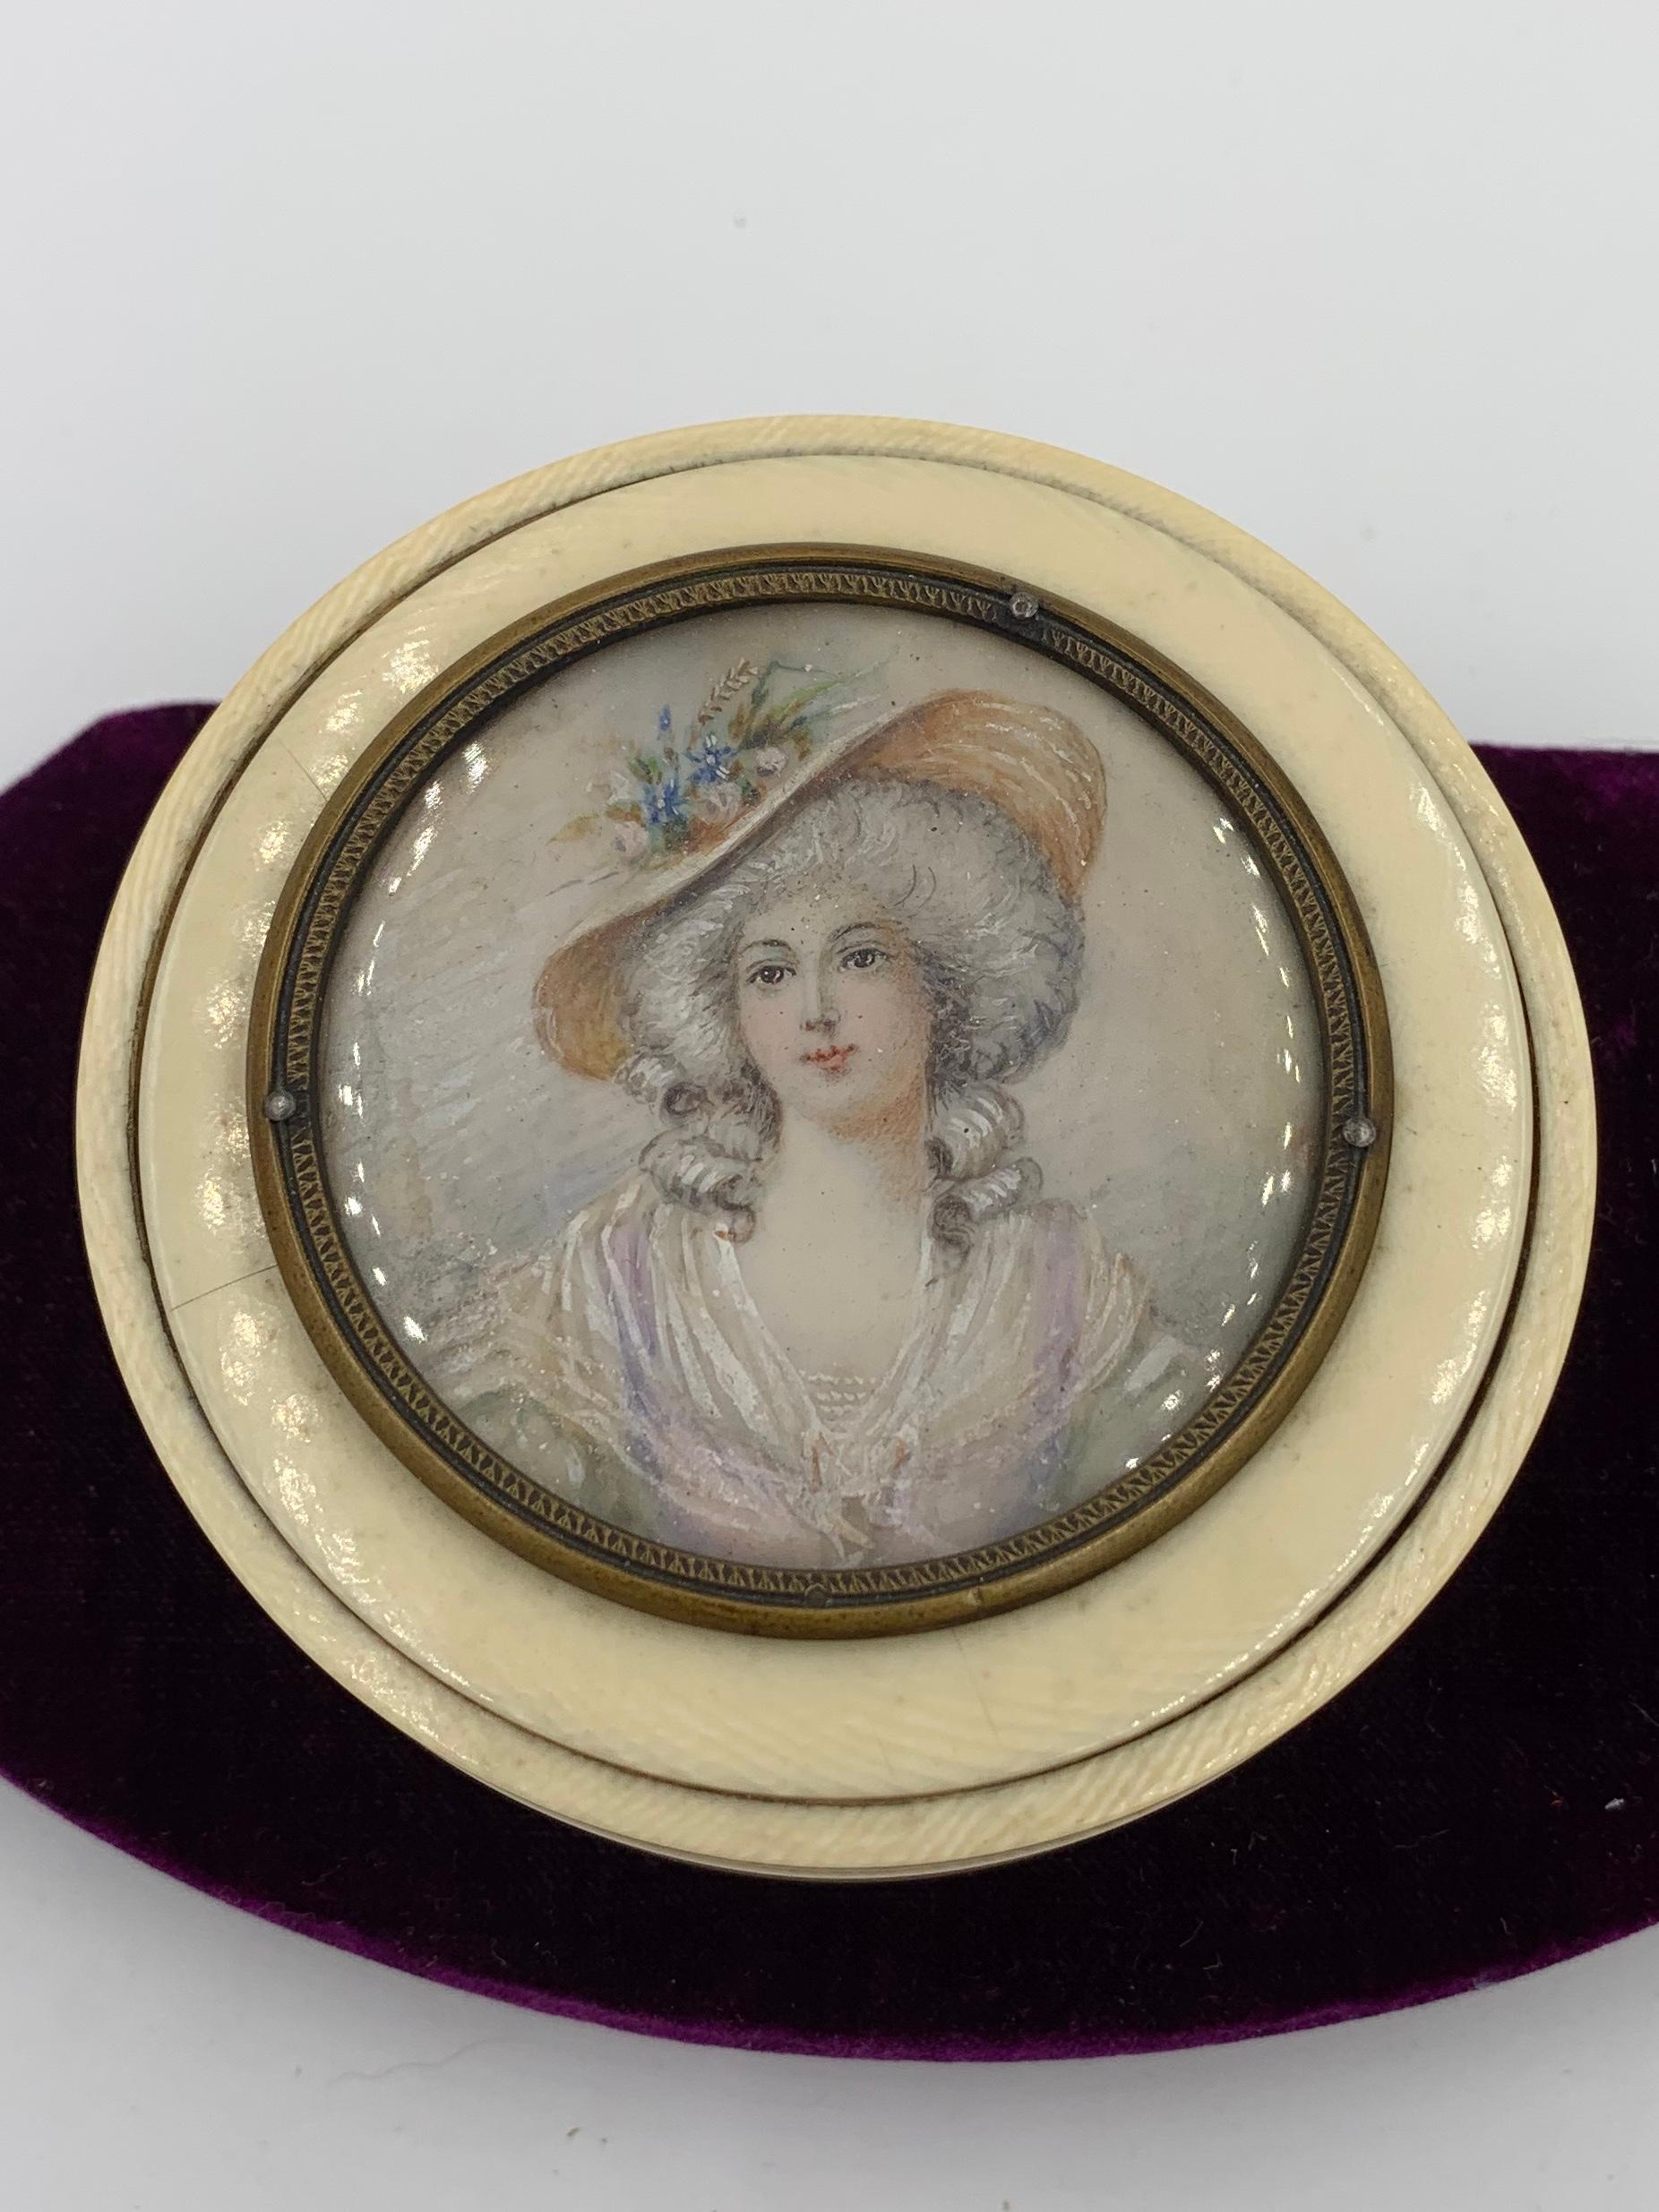 A beautiful dresser box with a hand painted portrait miniature of a woman in her hat.  The miniature is beautifully done wihth a lovely face, gorgeous hat and stunning diaphanous dress.  The quality of the painting is superb.  She has stunningly